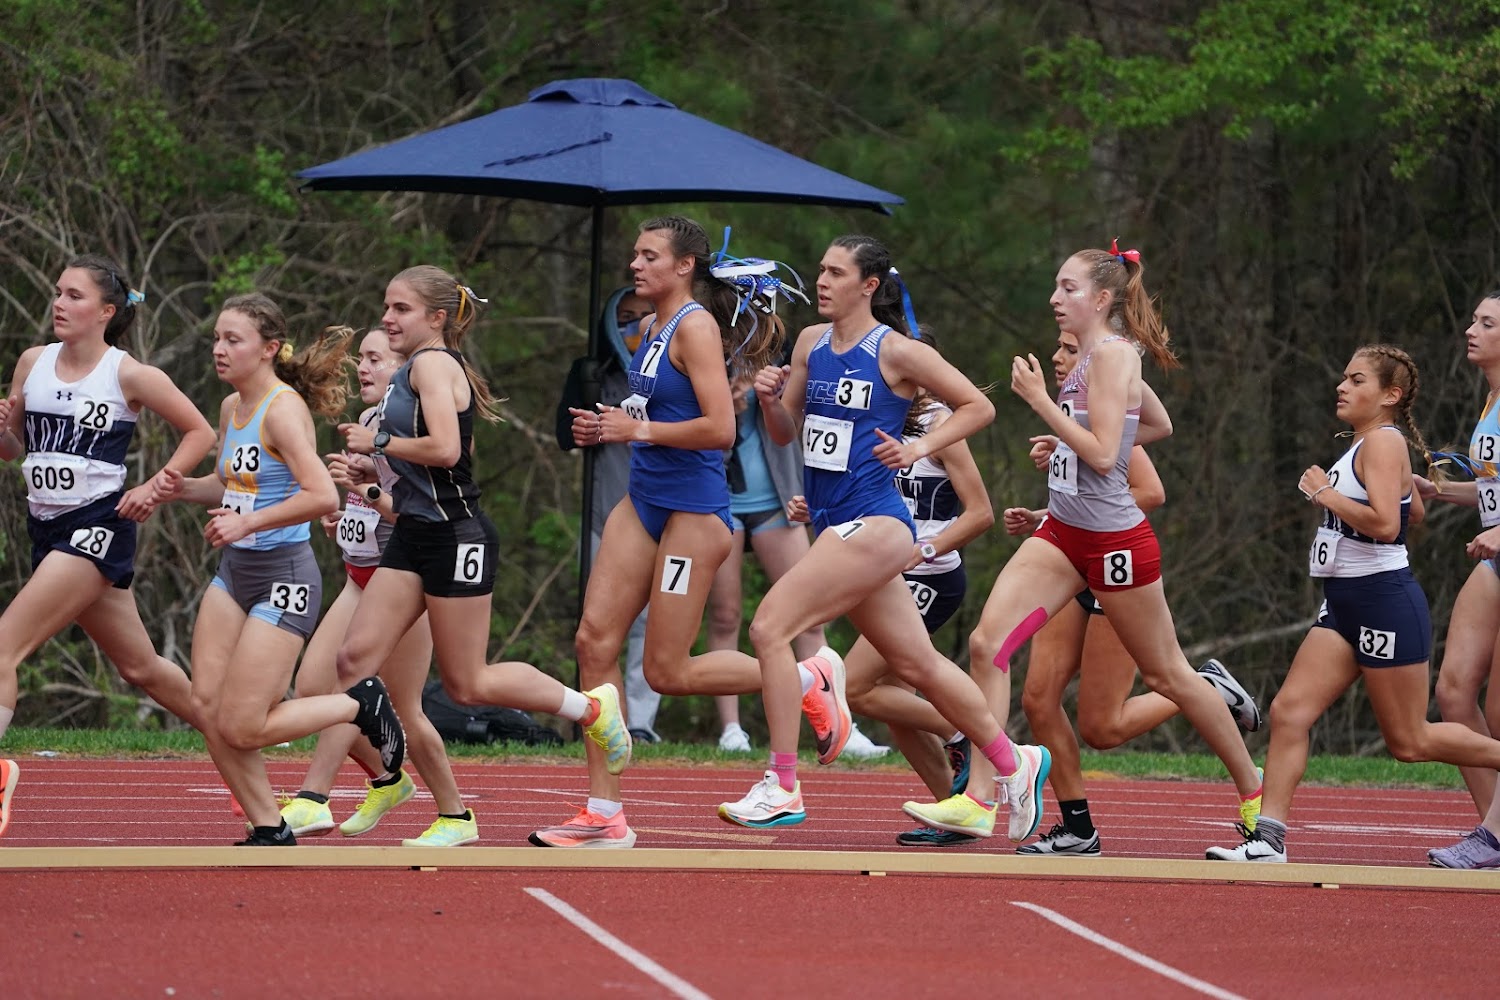 Rafter Adds Another Victory to Belt, Women's Track and Field Impresses at NEIC